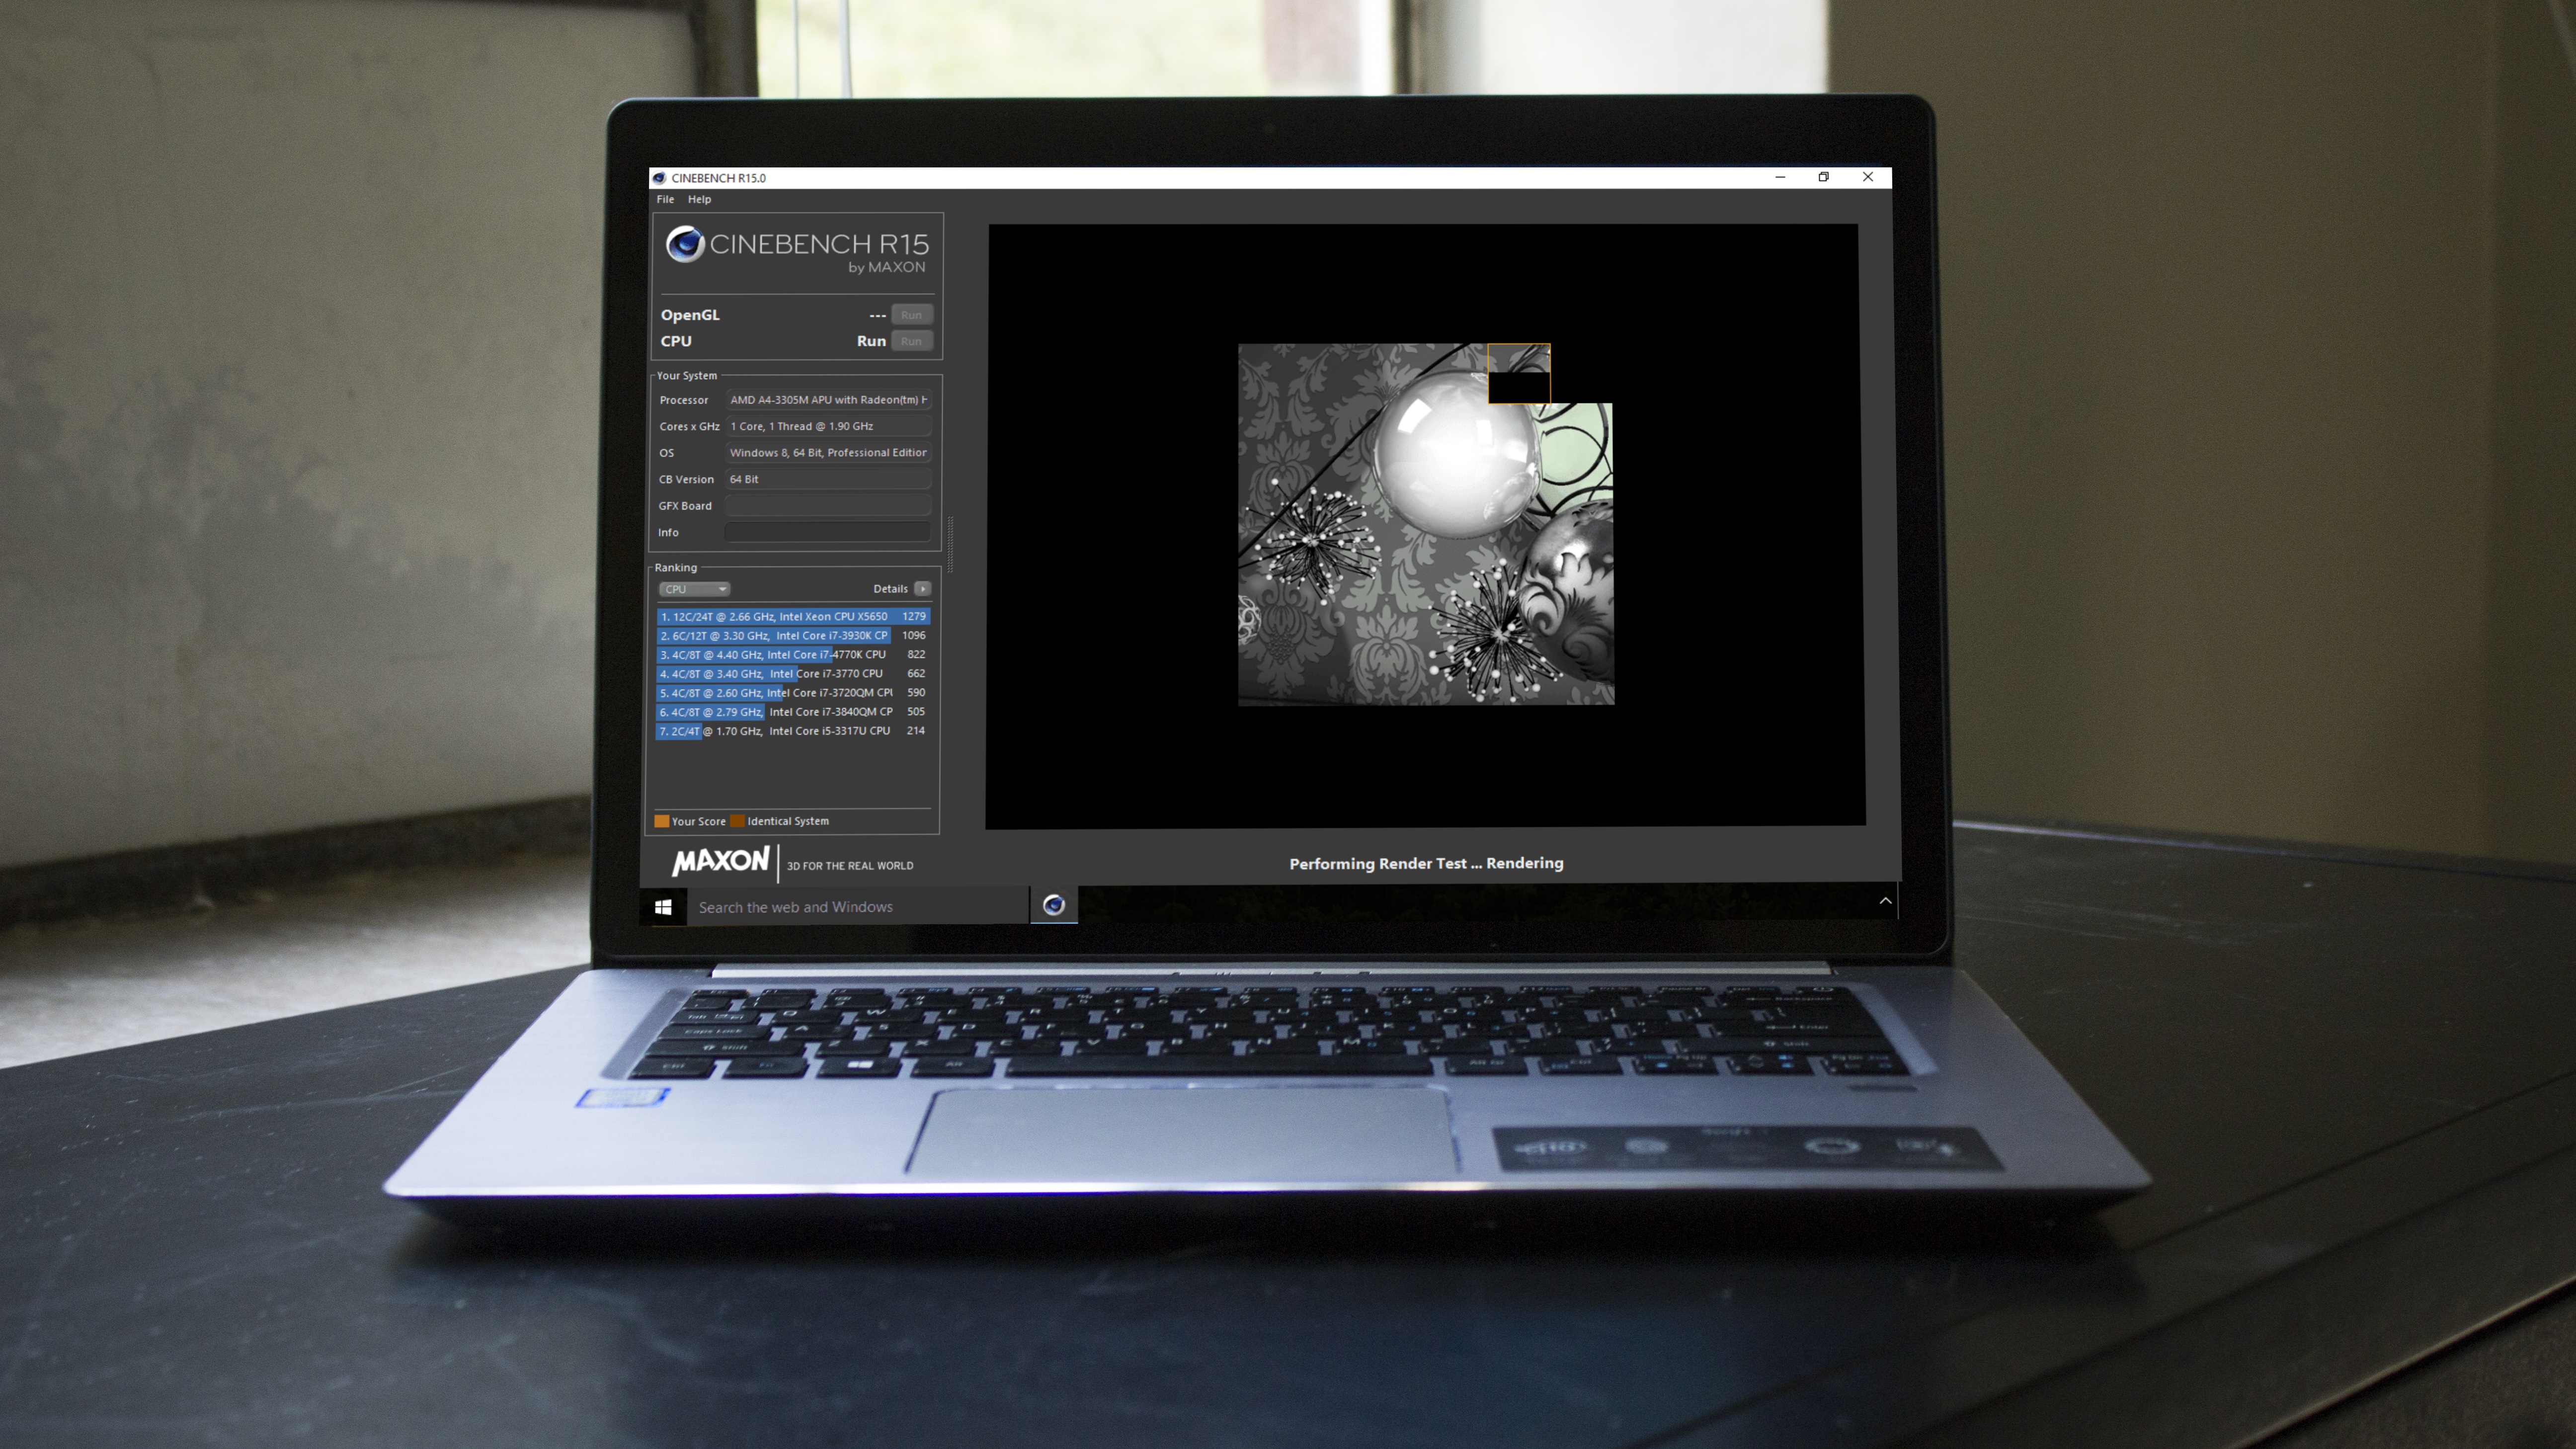 for apple download CINEBENCH 2024